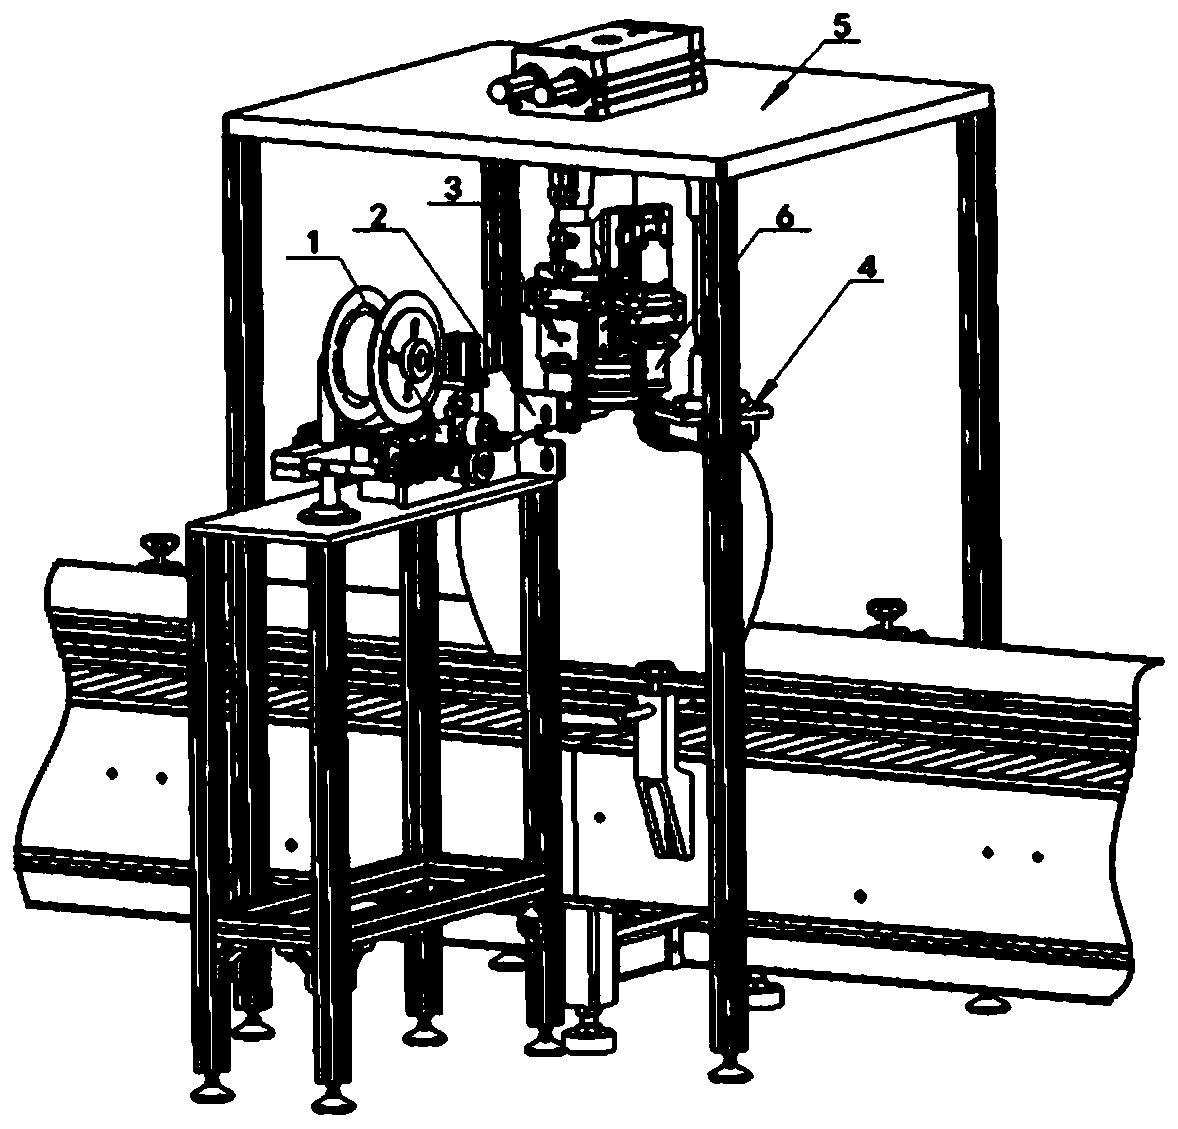 Shearing and wire tightening device for automatic tying equipment of wine jar